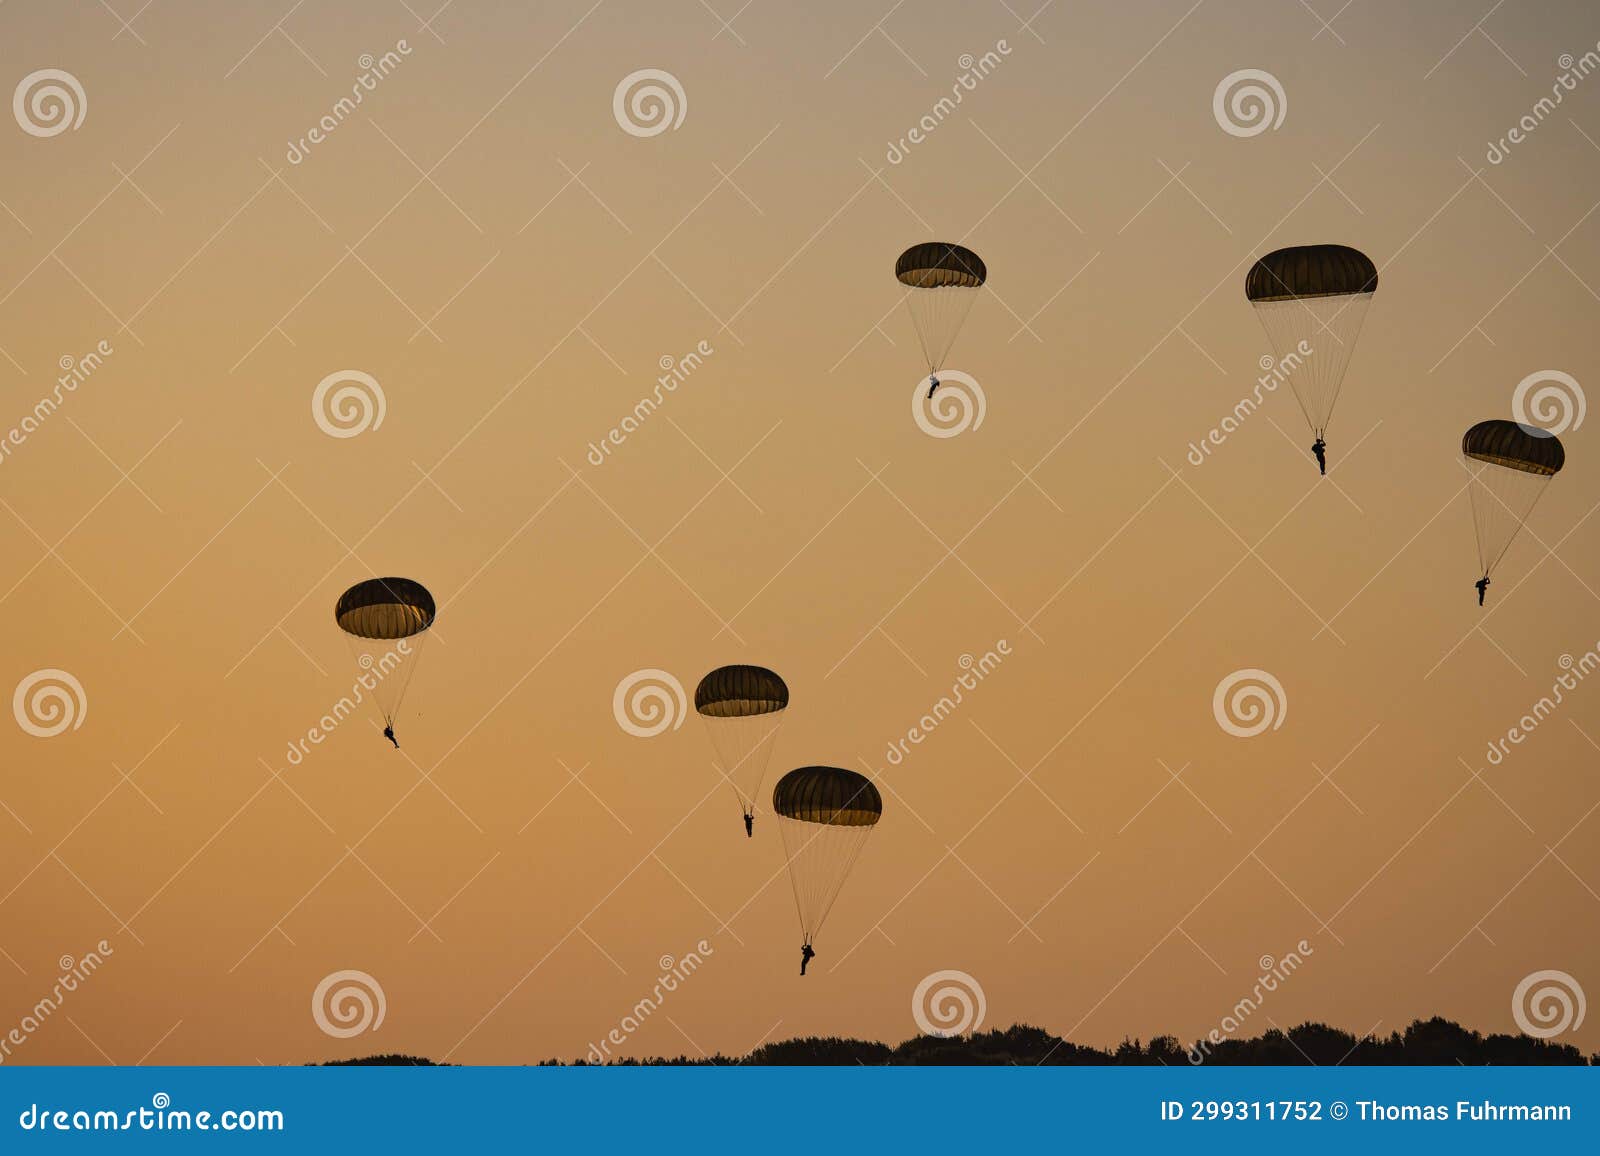 german bundeswehr paratroopers in camouflage during a parachute jump